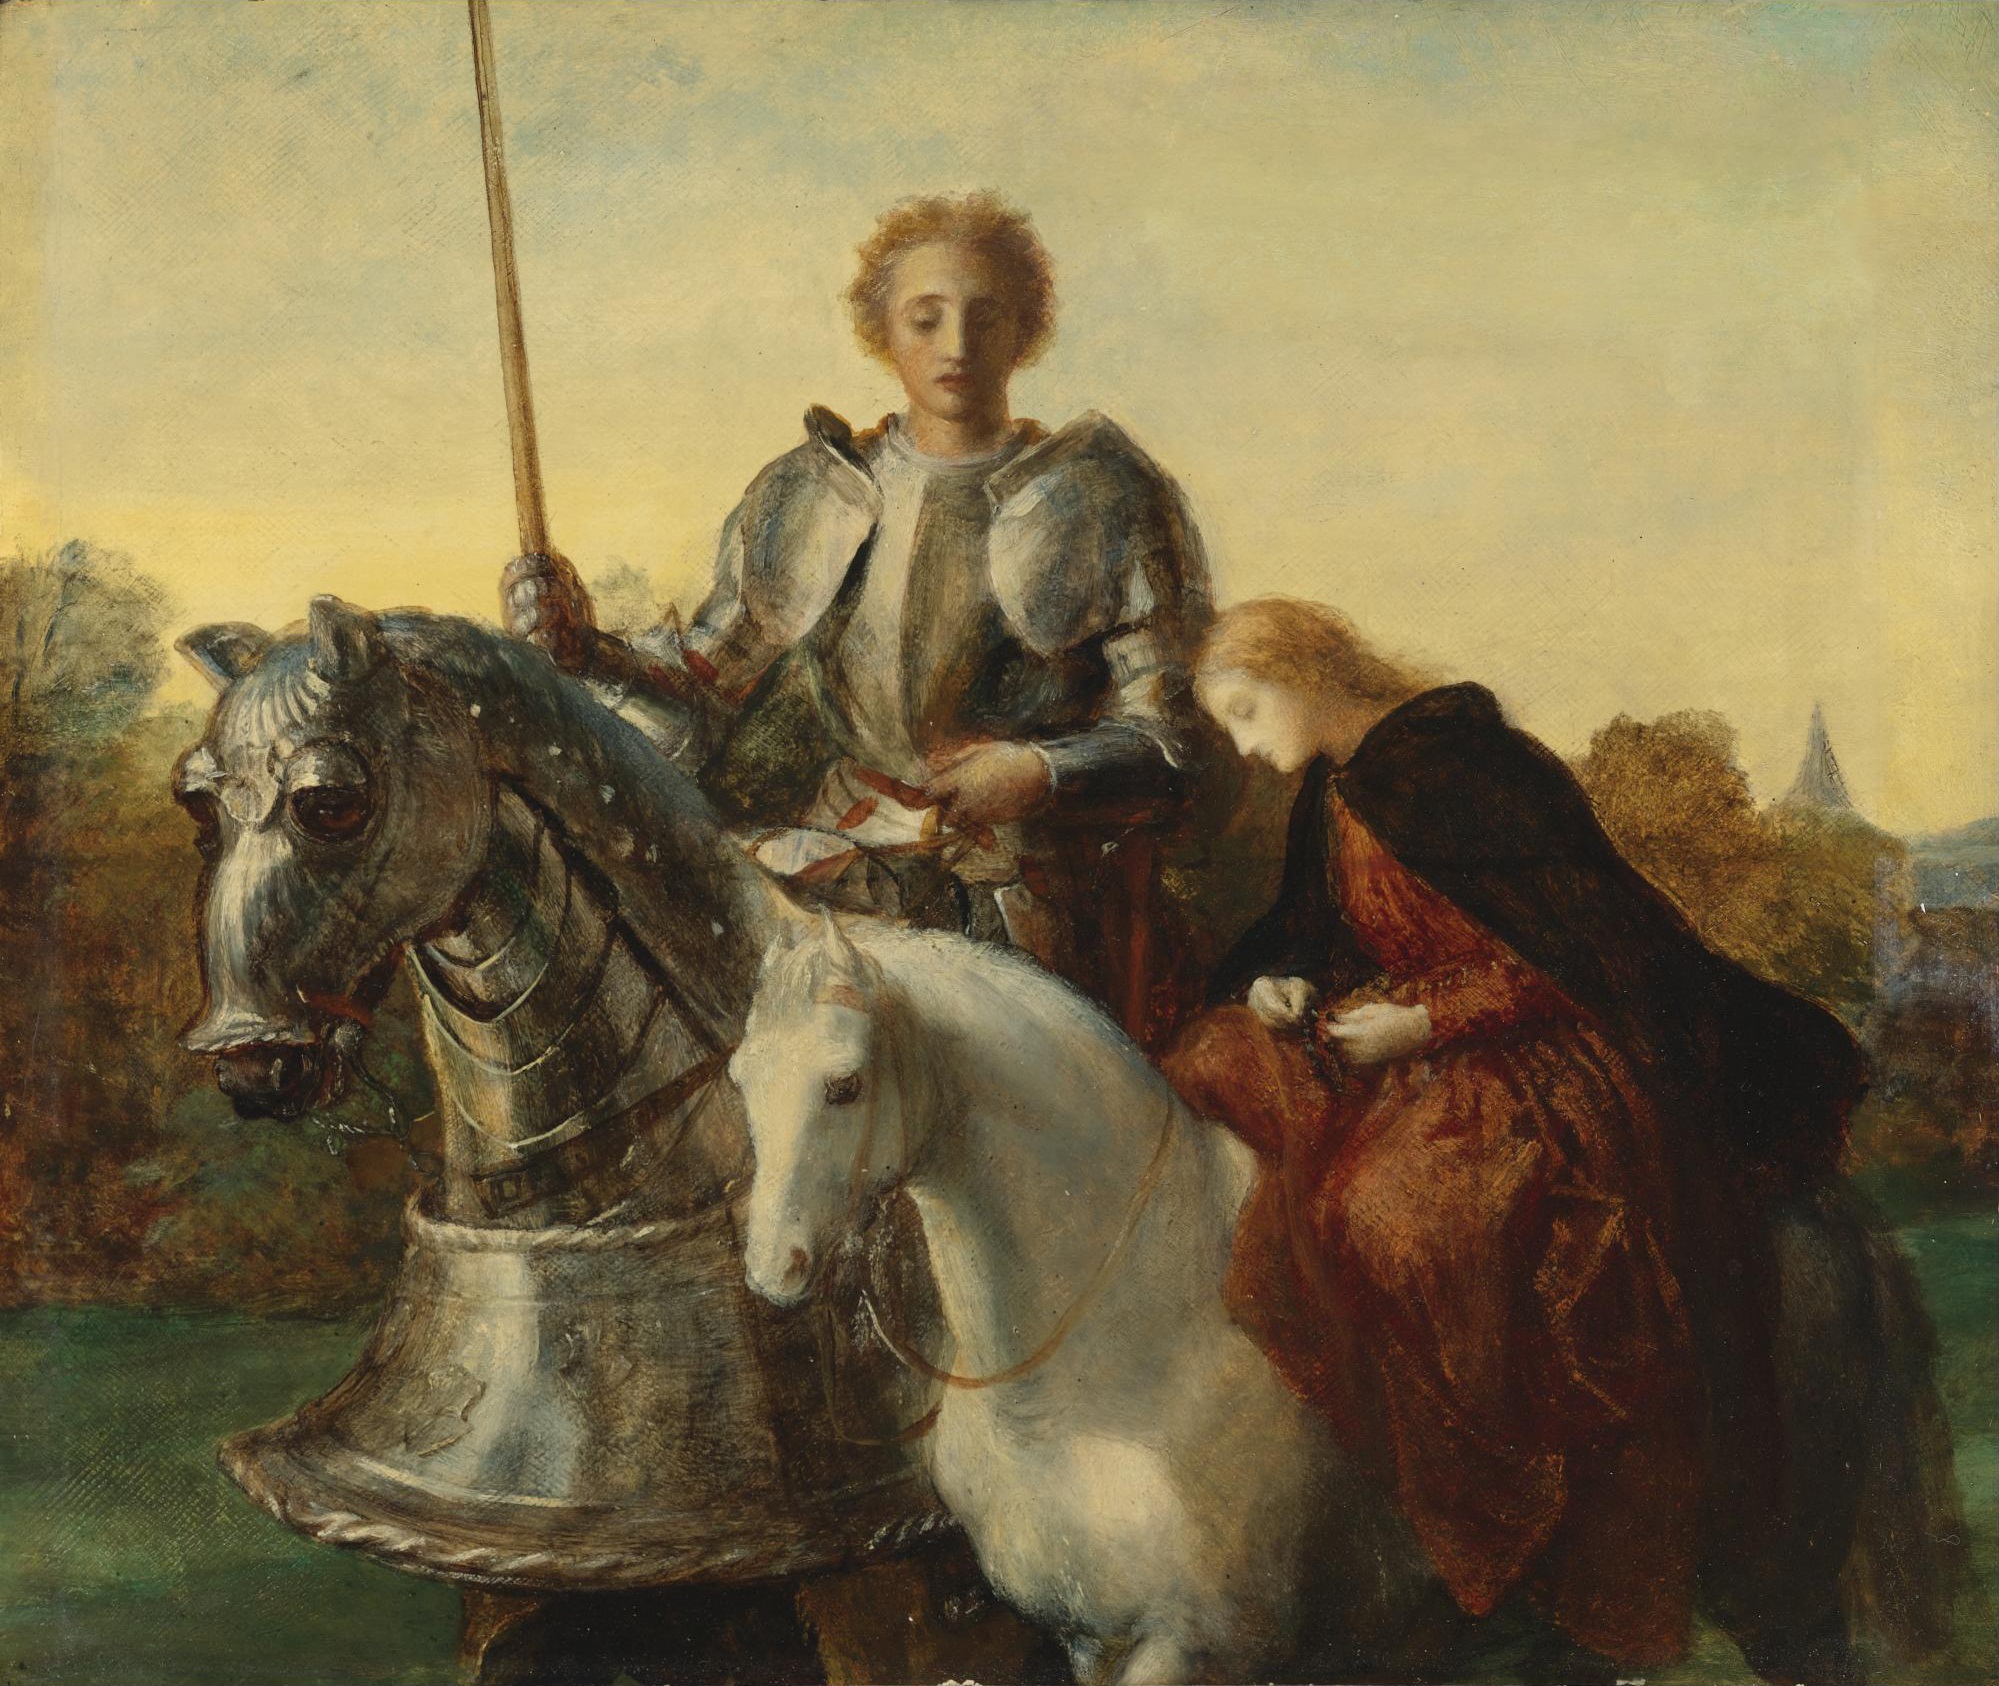 George Frederic Watts - Una and the Red Cross (study)